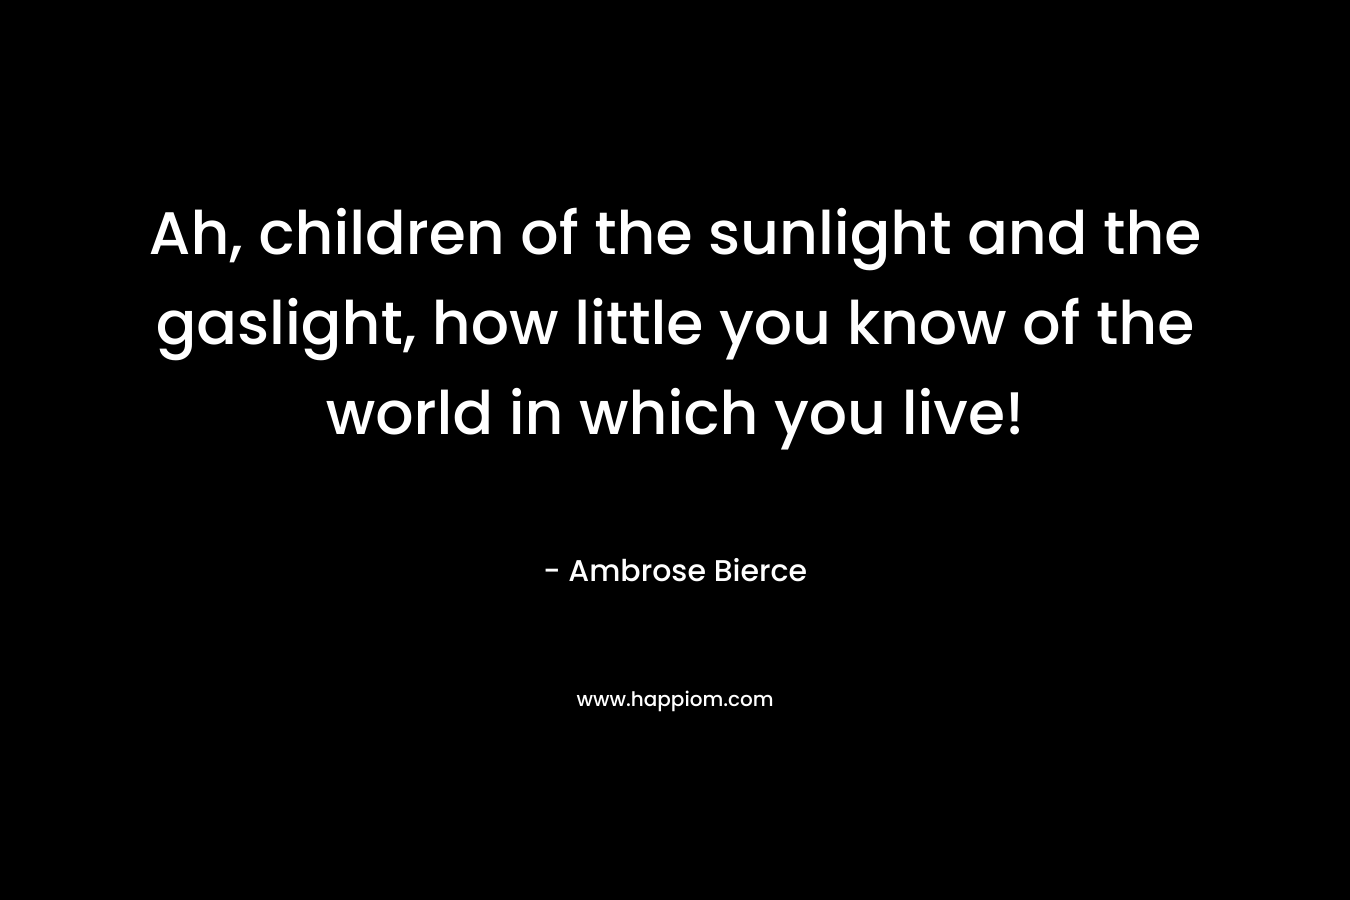 Ah, children of the sunlight and the gaslight, how little you know of the world in which you live! – Ambrose Bierce